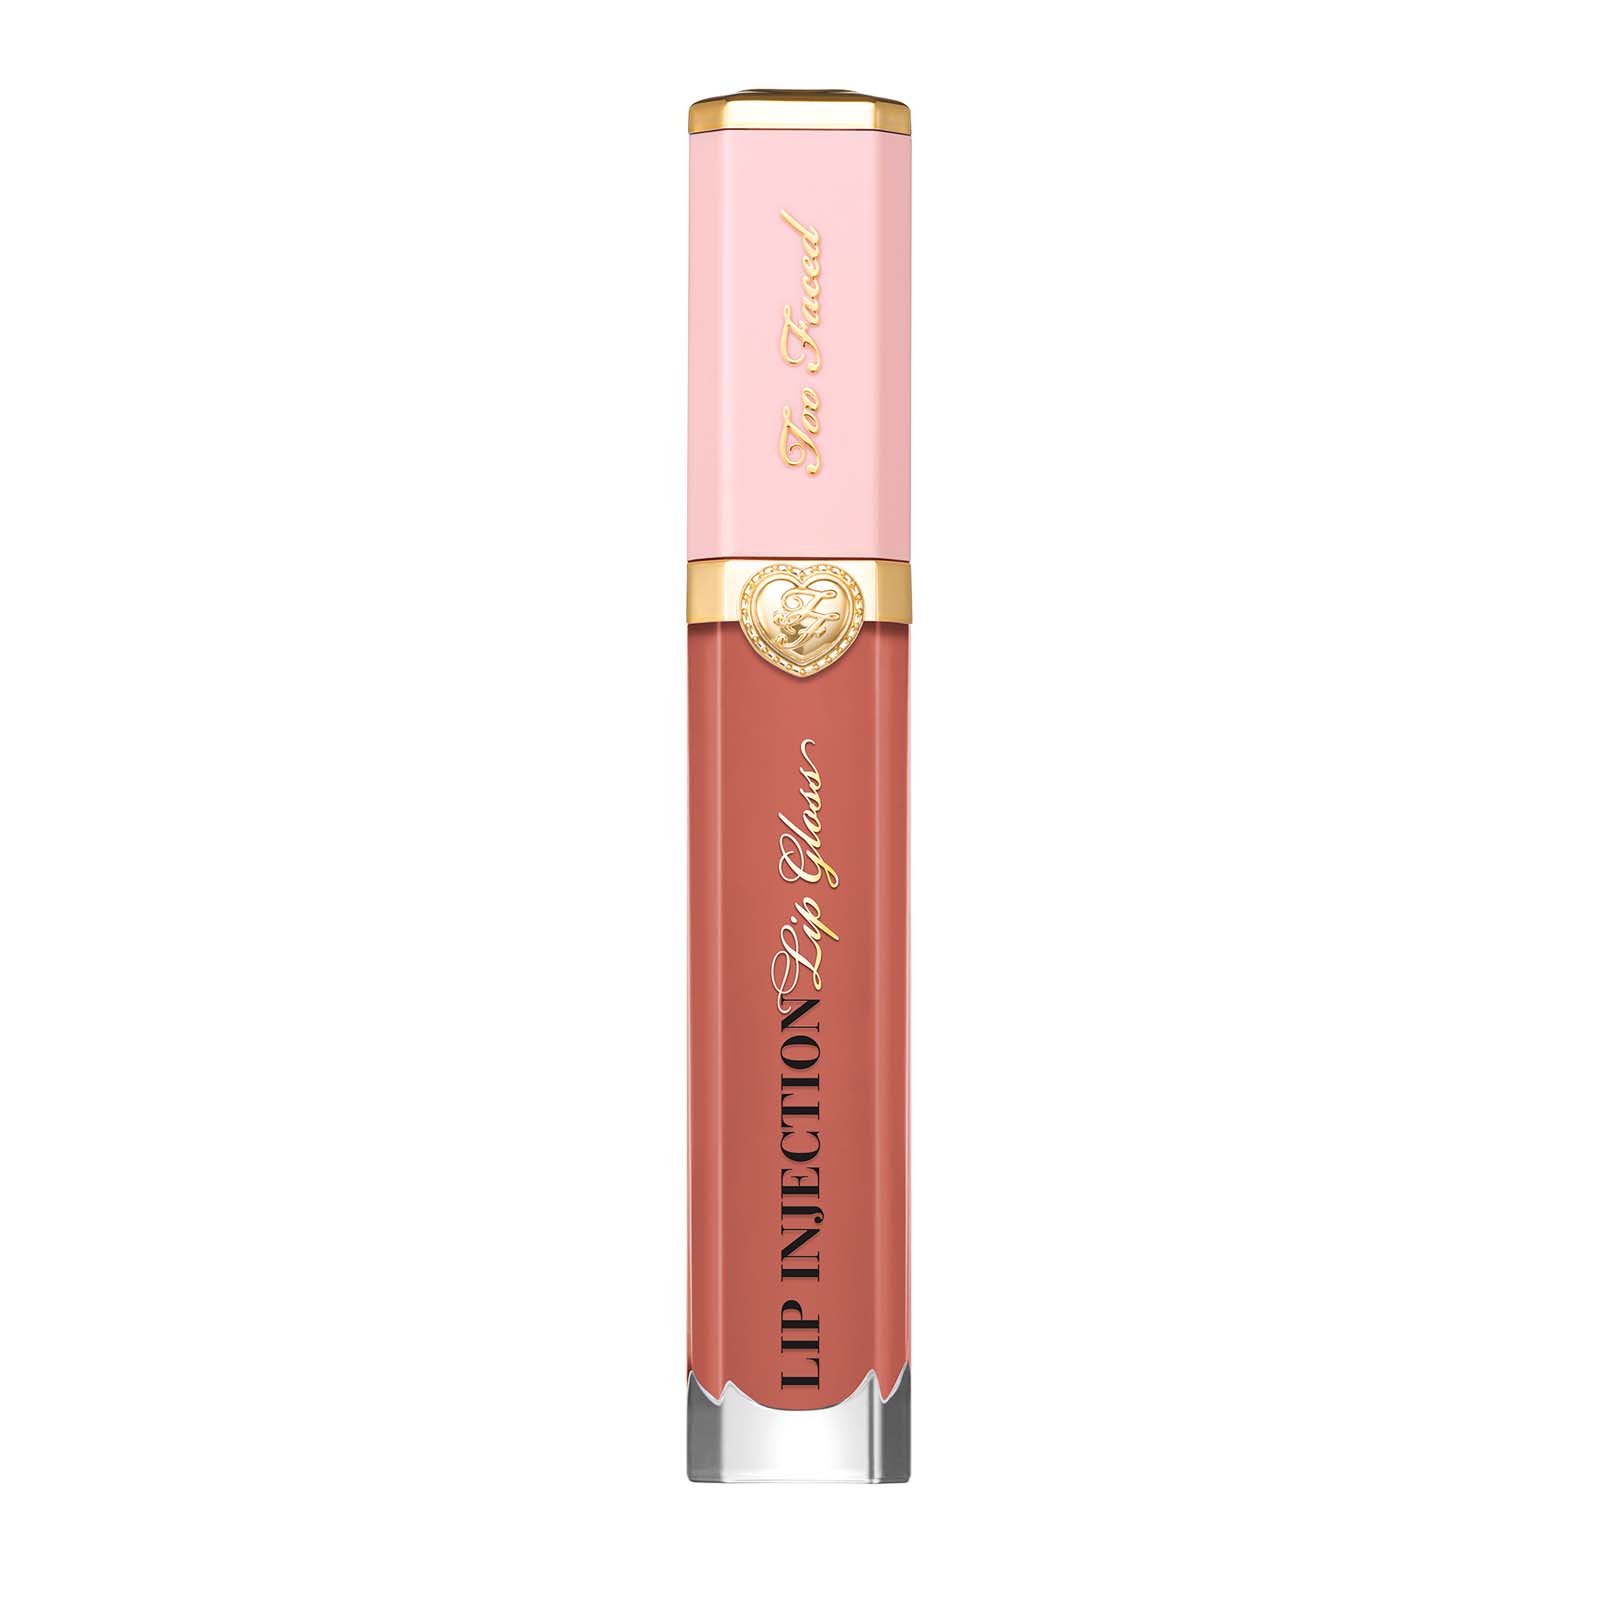 Too Faced Lip Injection Power Plumping Lip Gloss 6.5Ml Secure The Bag